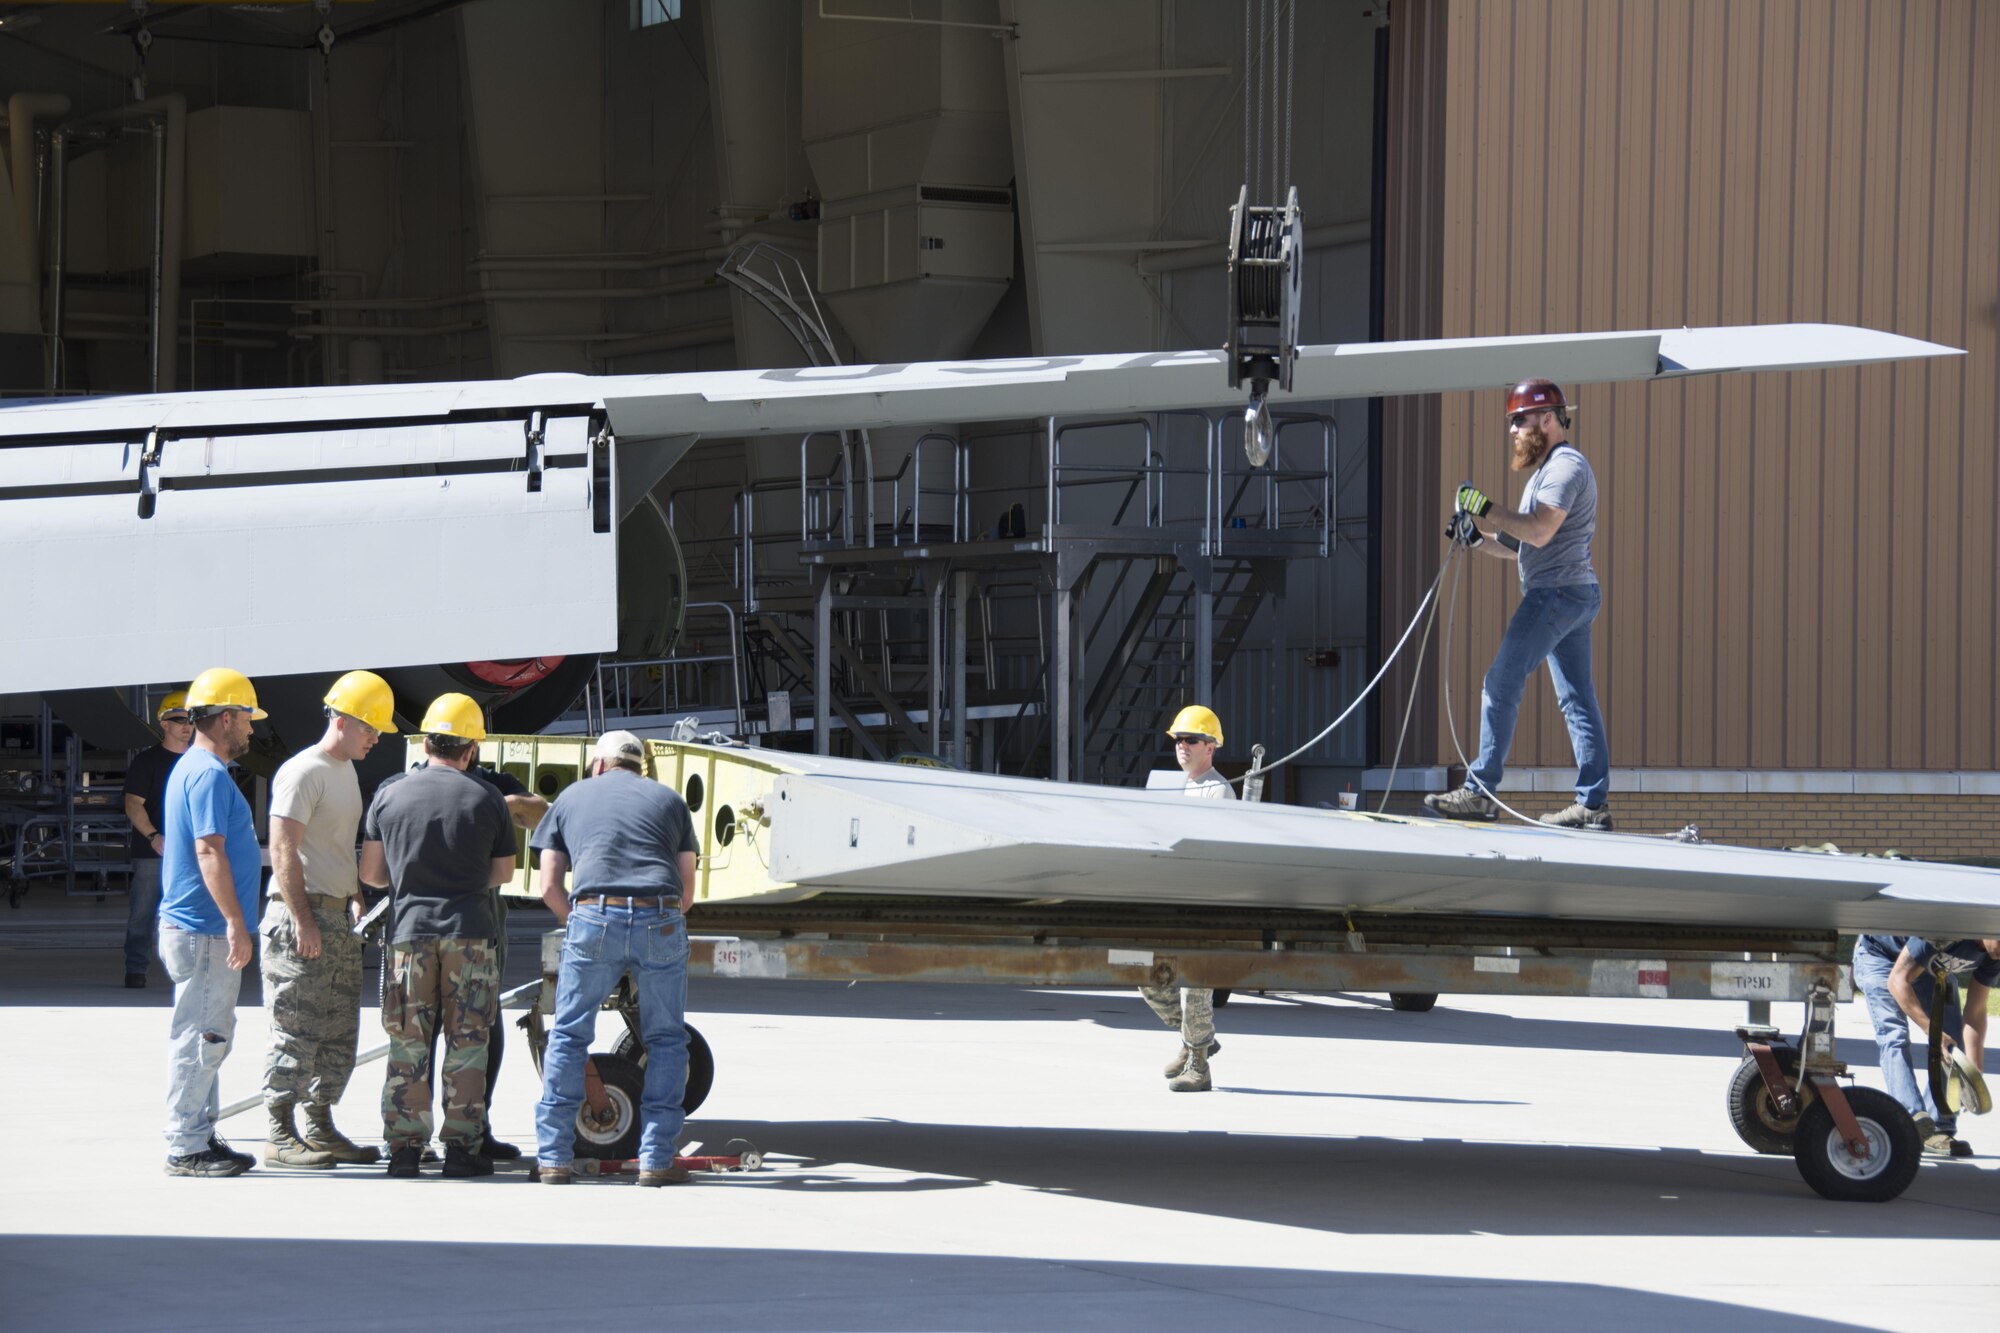 Members of the 507th Maintenance Squadron and the 564th Aircraft Maintenance Squadron work together to install a vertical stabilizer on a KC-135 Stratotanker following rudder and stabilizer repair Sept. 27, 2016. The two squadrons worked together to complete the task, normally performed at the Oklahoma City Air Logistics Complex. (U.S. Air Force photo by Tech. Sgt. Lauren Gleason)